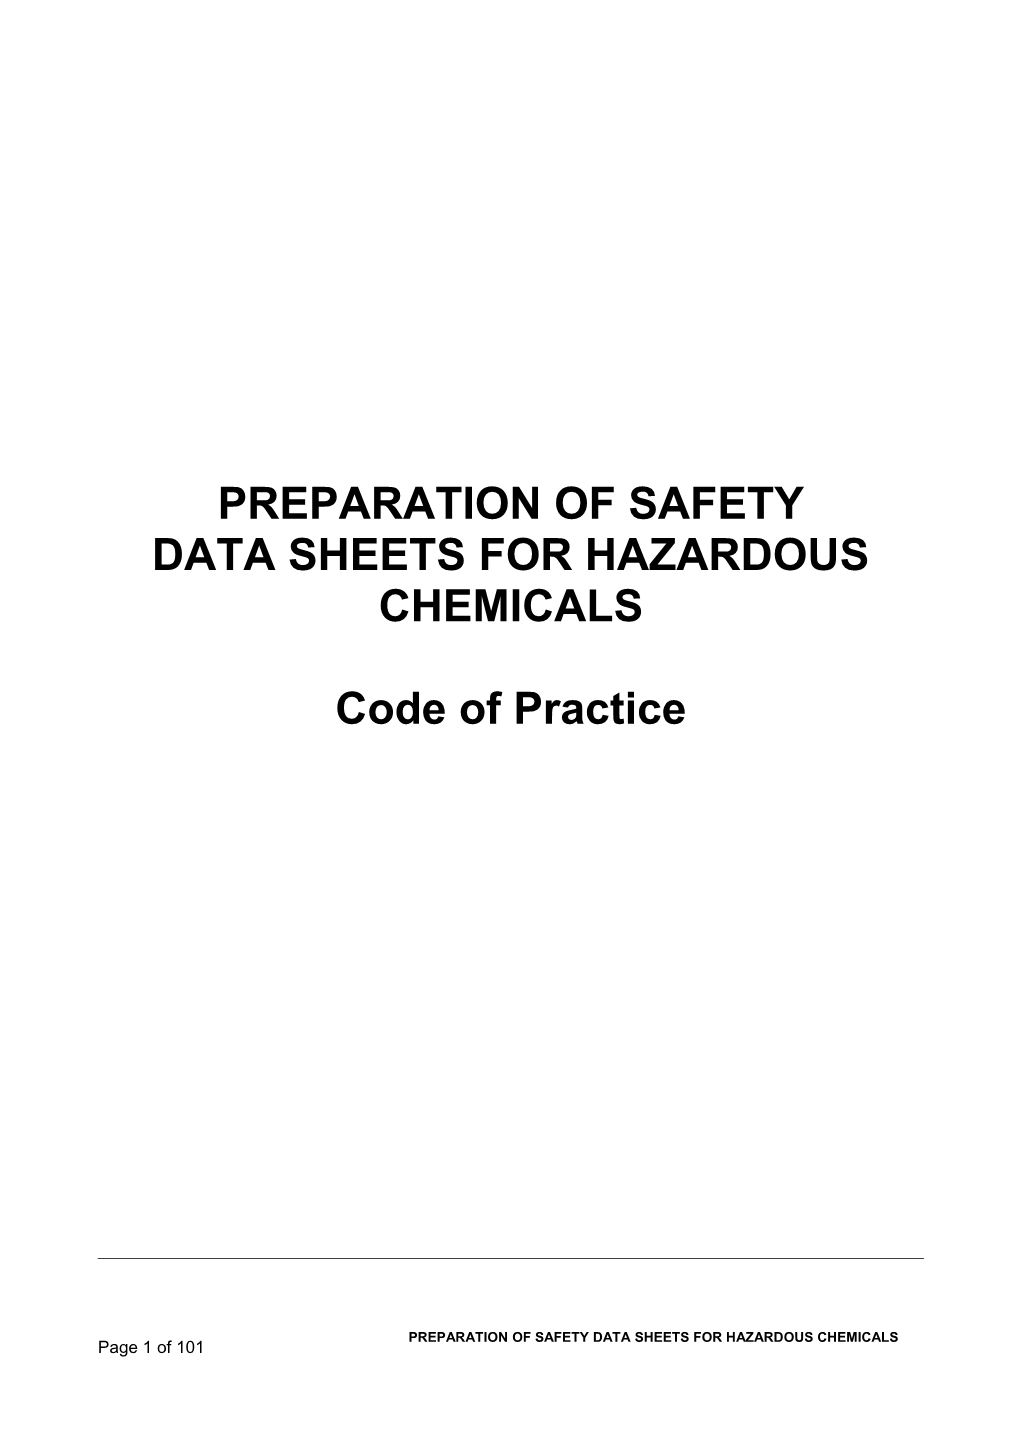 Preparation of Safety Data Sheets for Hazardous Chemicals